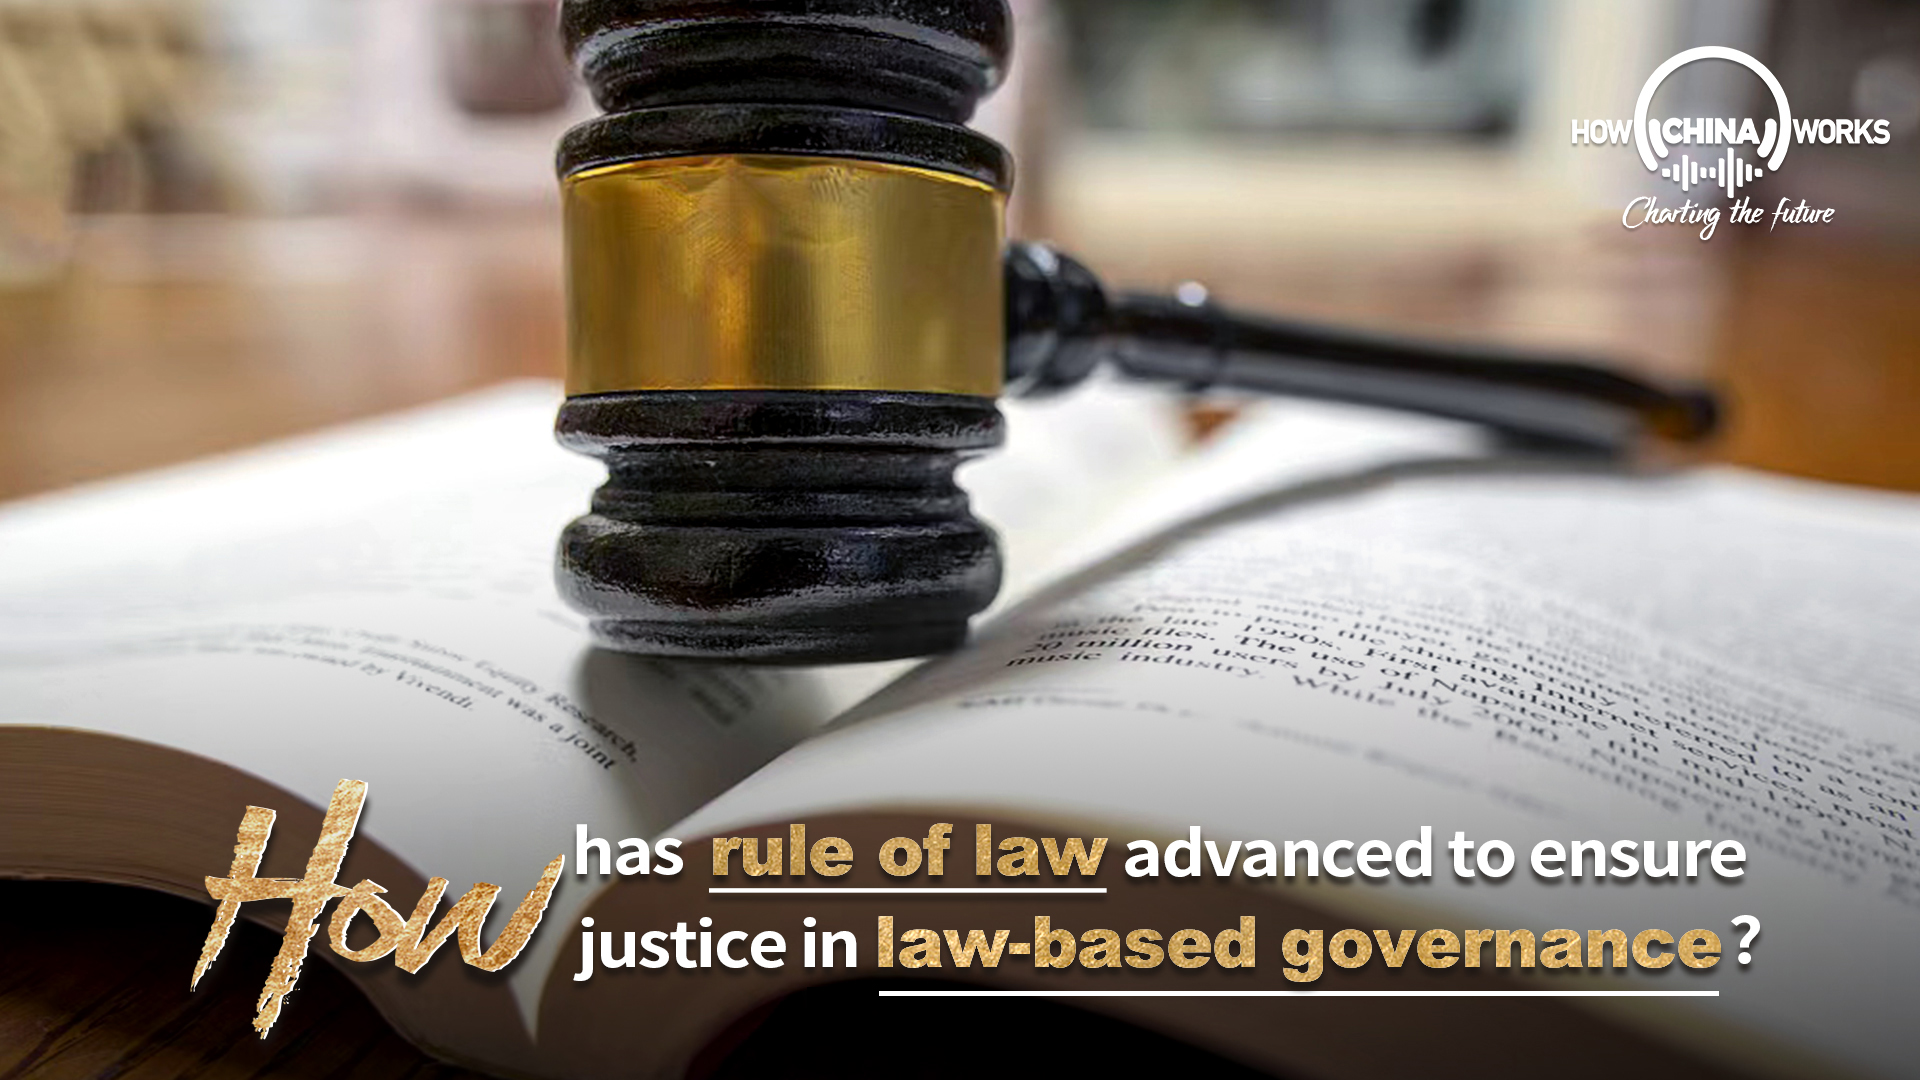 How has rule of law advanced to ensure justice in law-based governance?